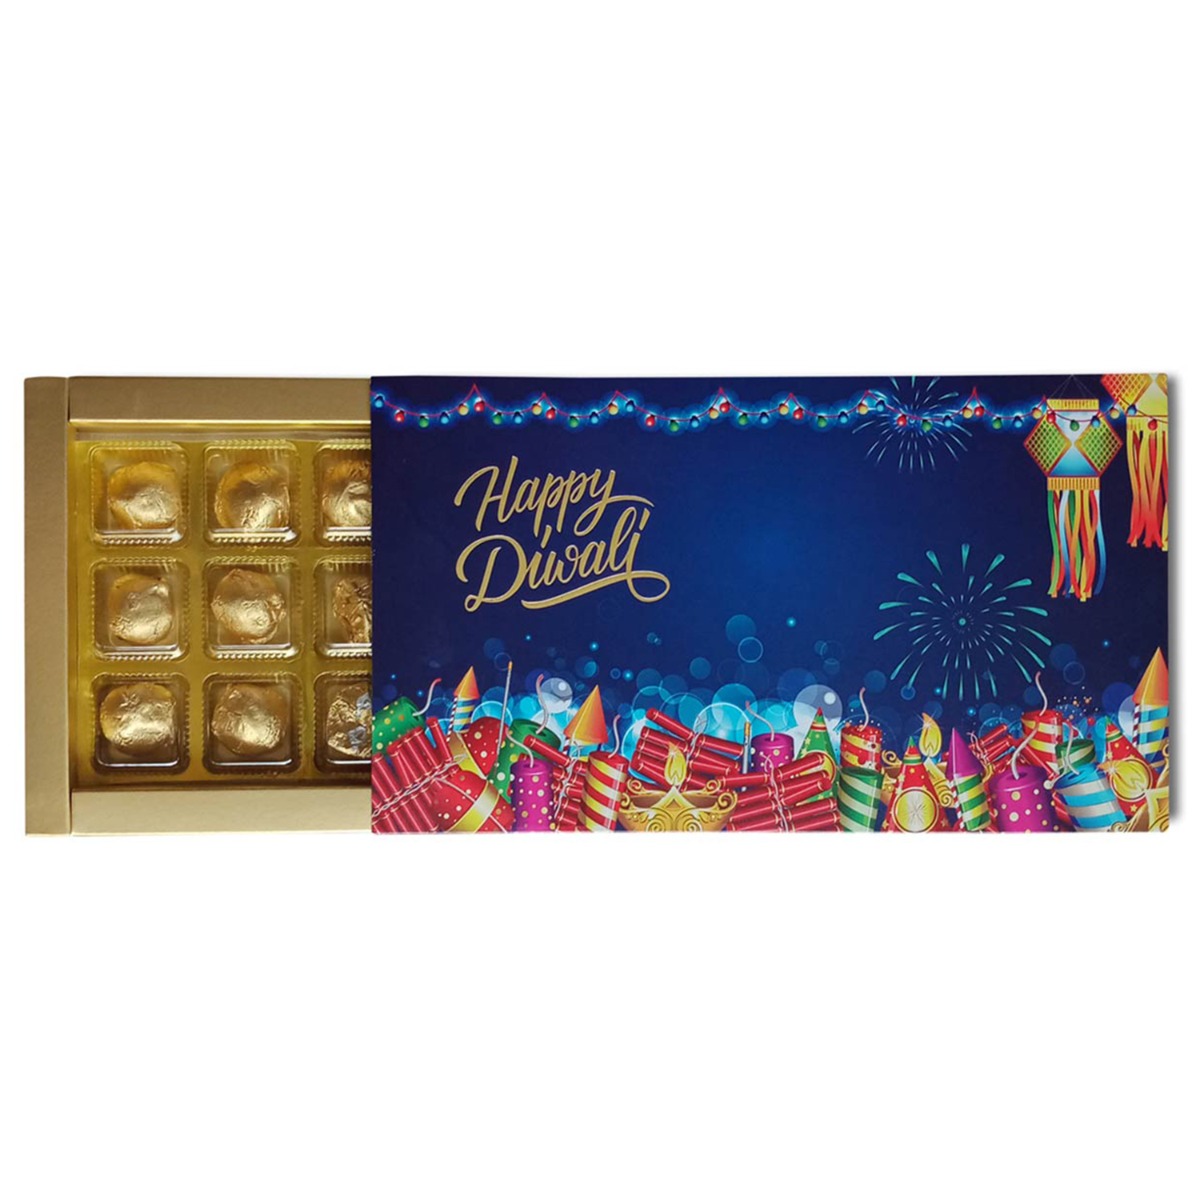 Eat Any time Healthy Diwali Gift Hamper Chocolate Hamper Box with Whey Protein Balls, Pack of 8 - 10gm Each